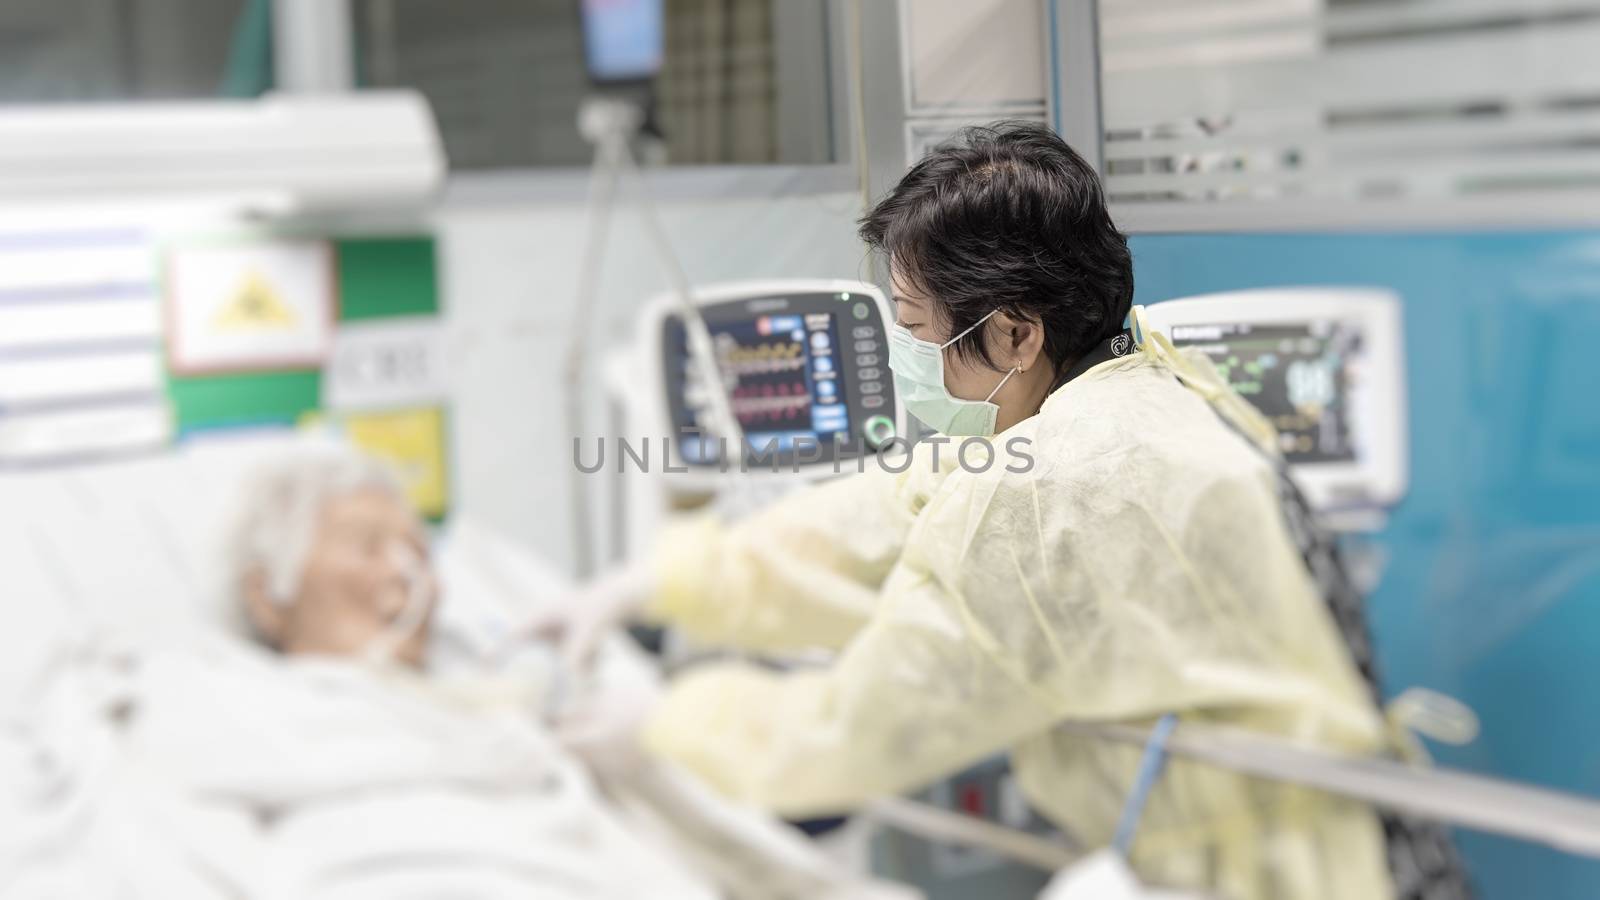 Asian women 40s years old in gown coat is a patient relative taking care of the CRE. or VRE. infected elder patient 80s years old on bed in the hospital.